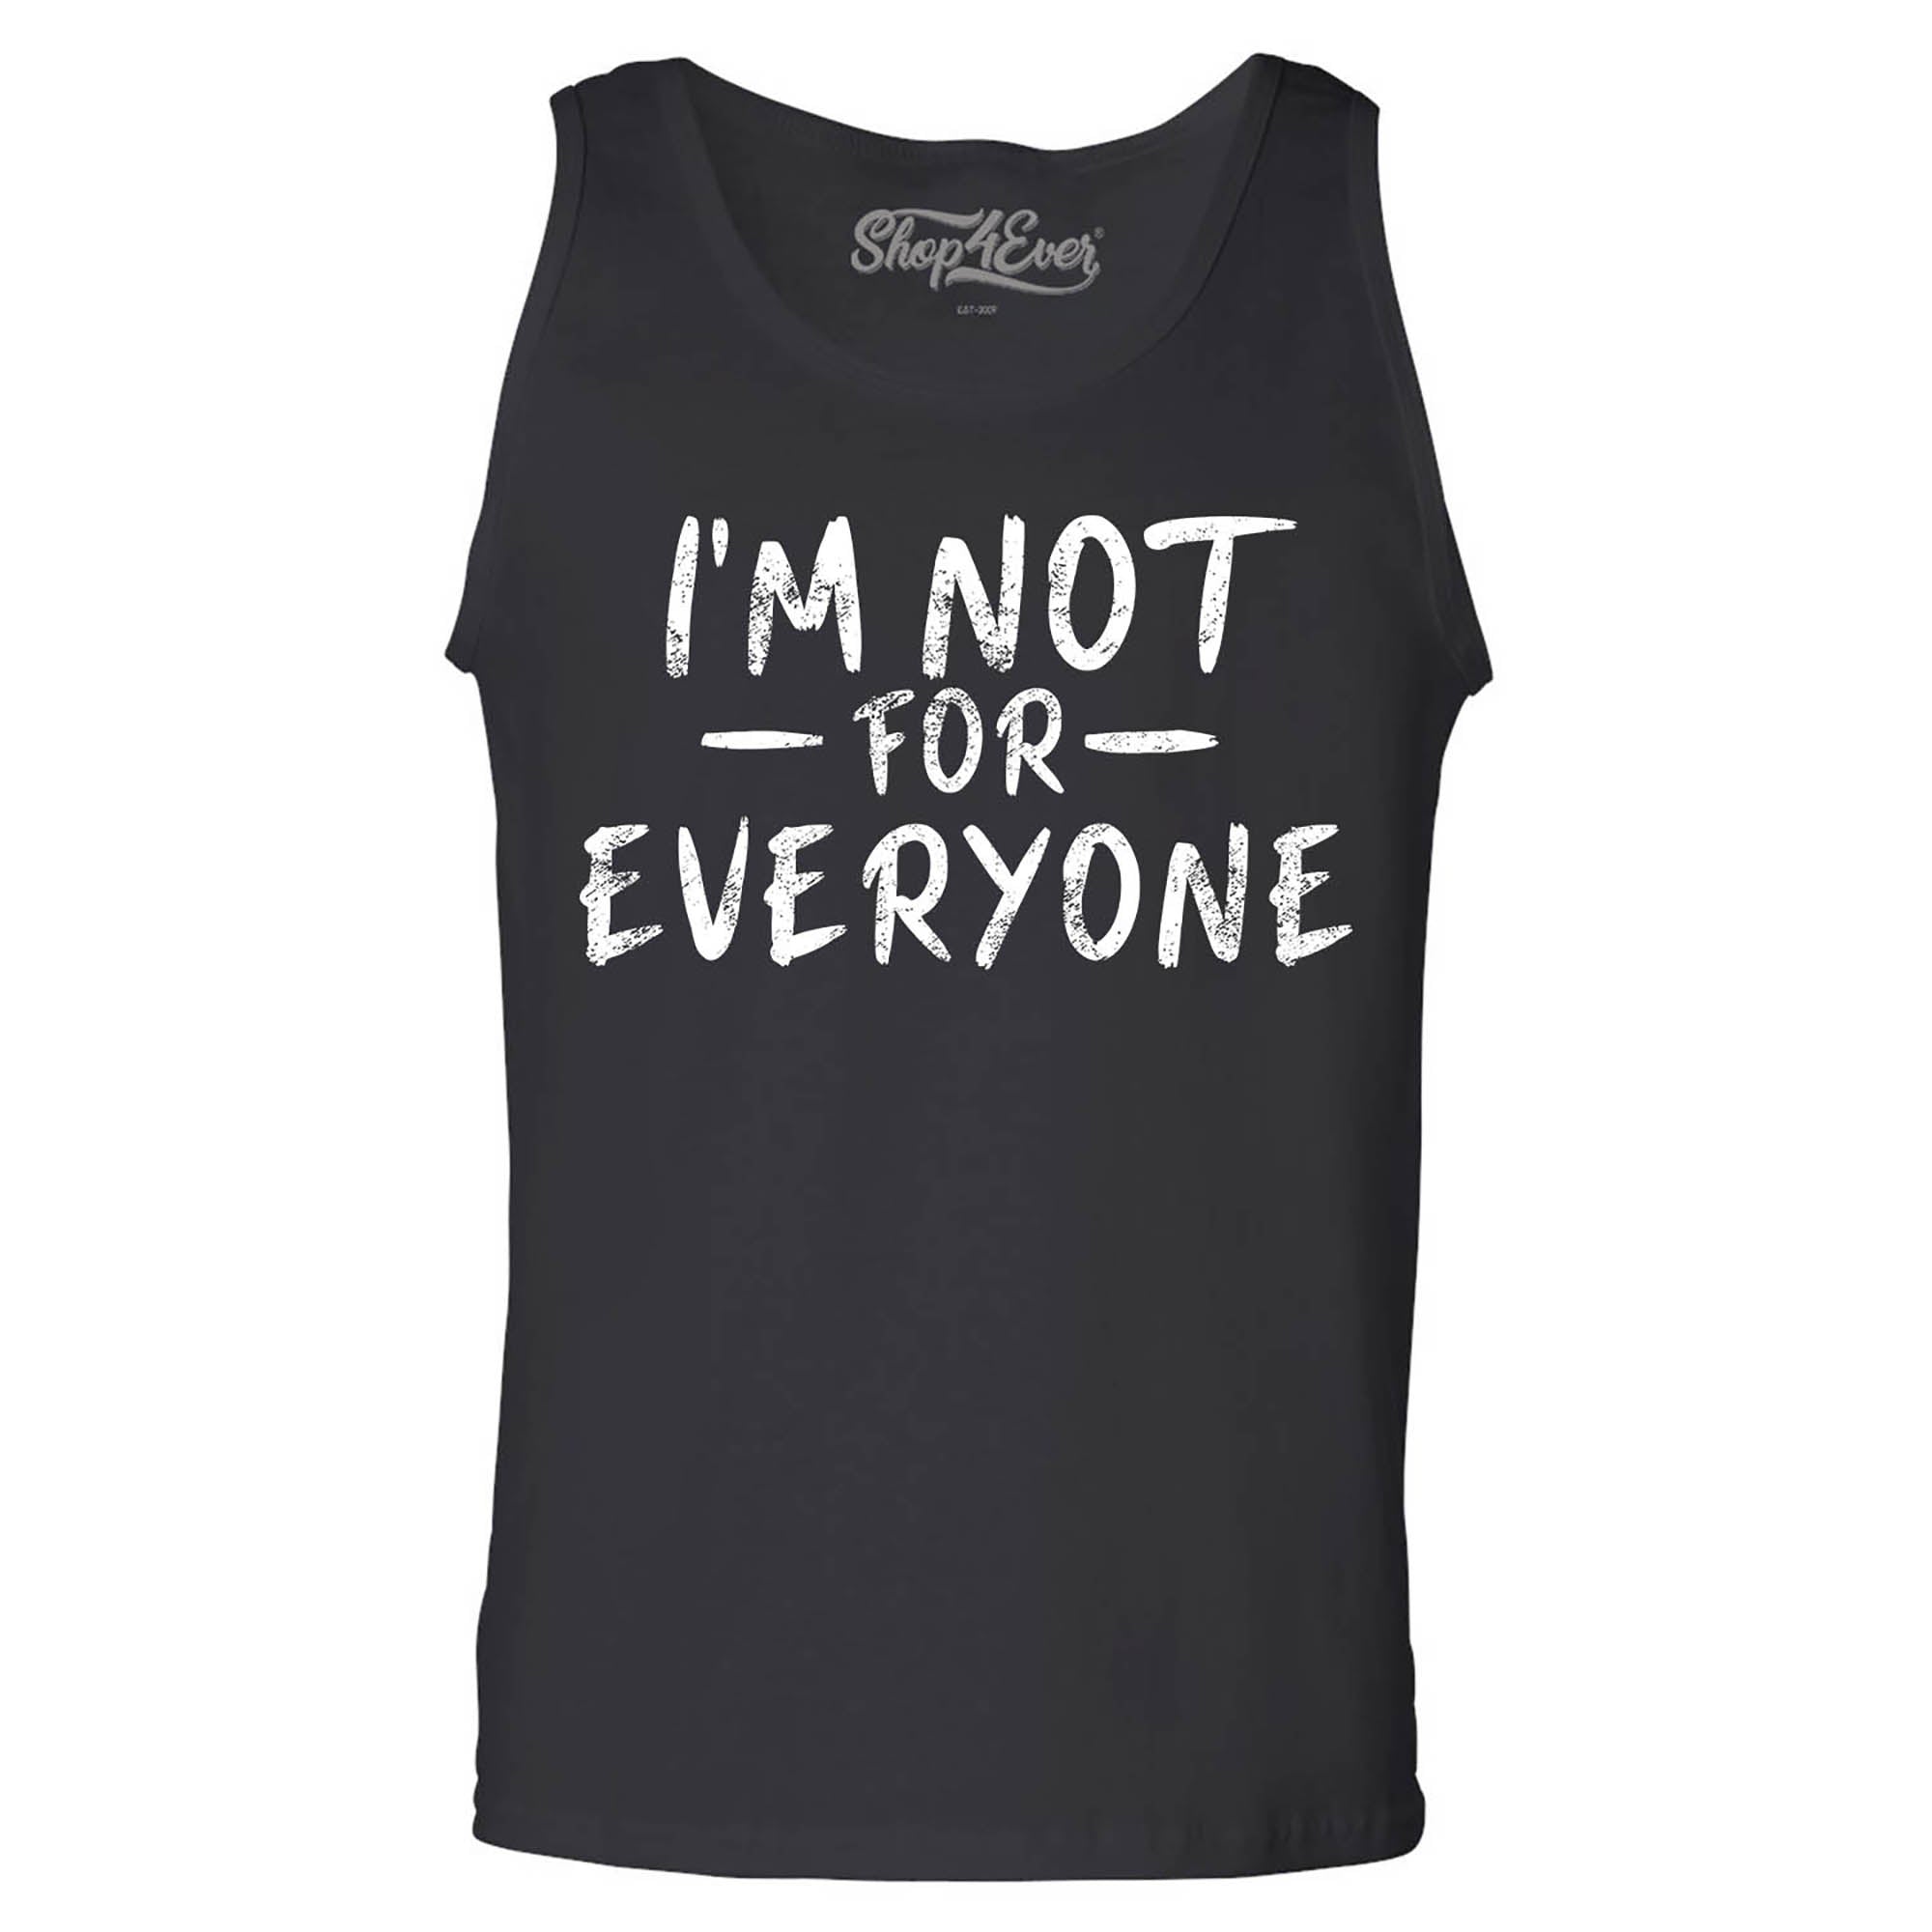 I'm Not for Everyone Funny Men's Tank Top